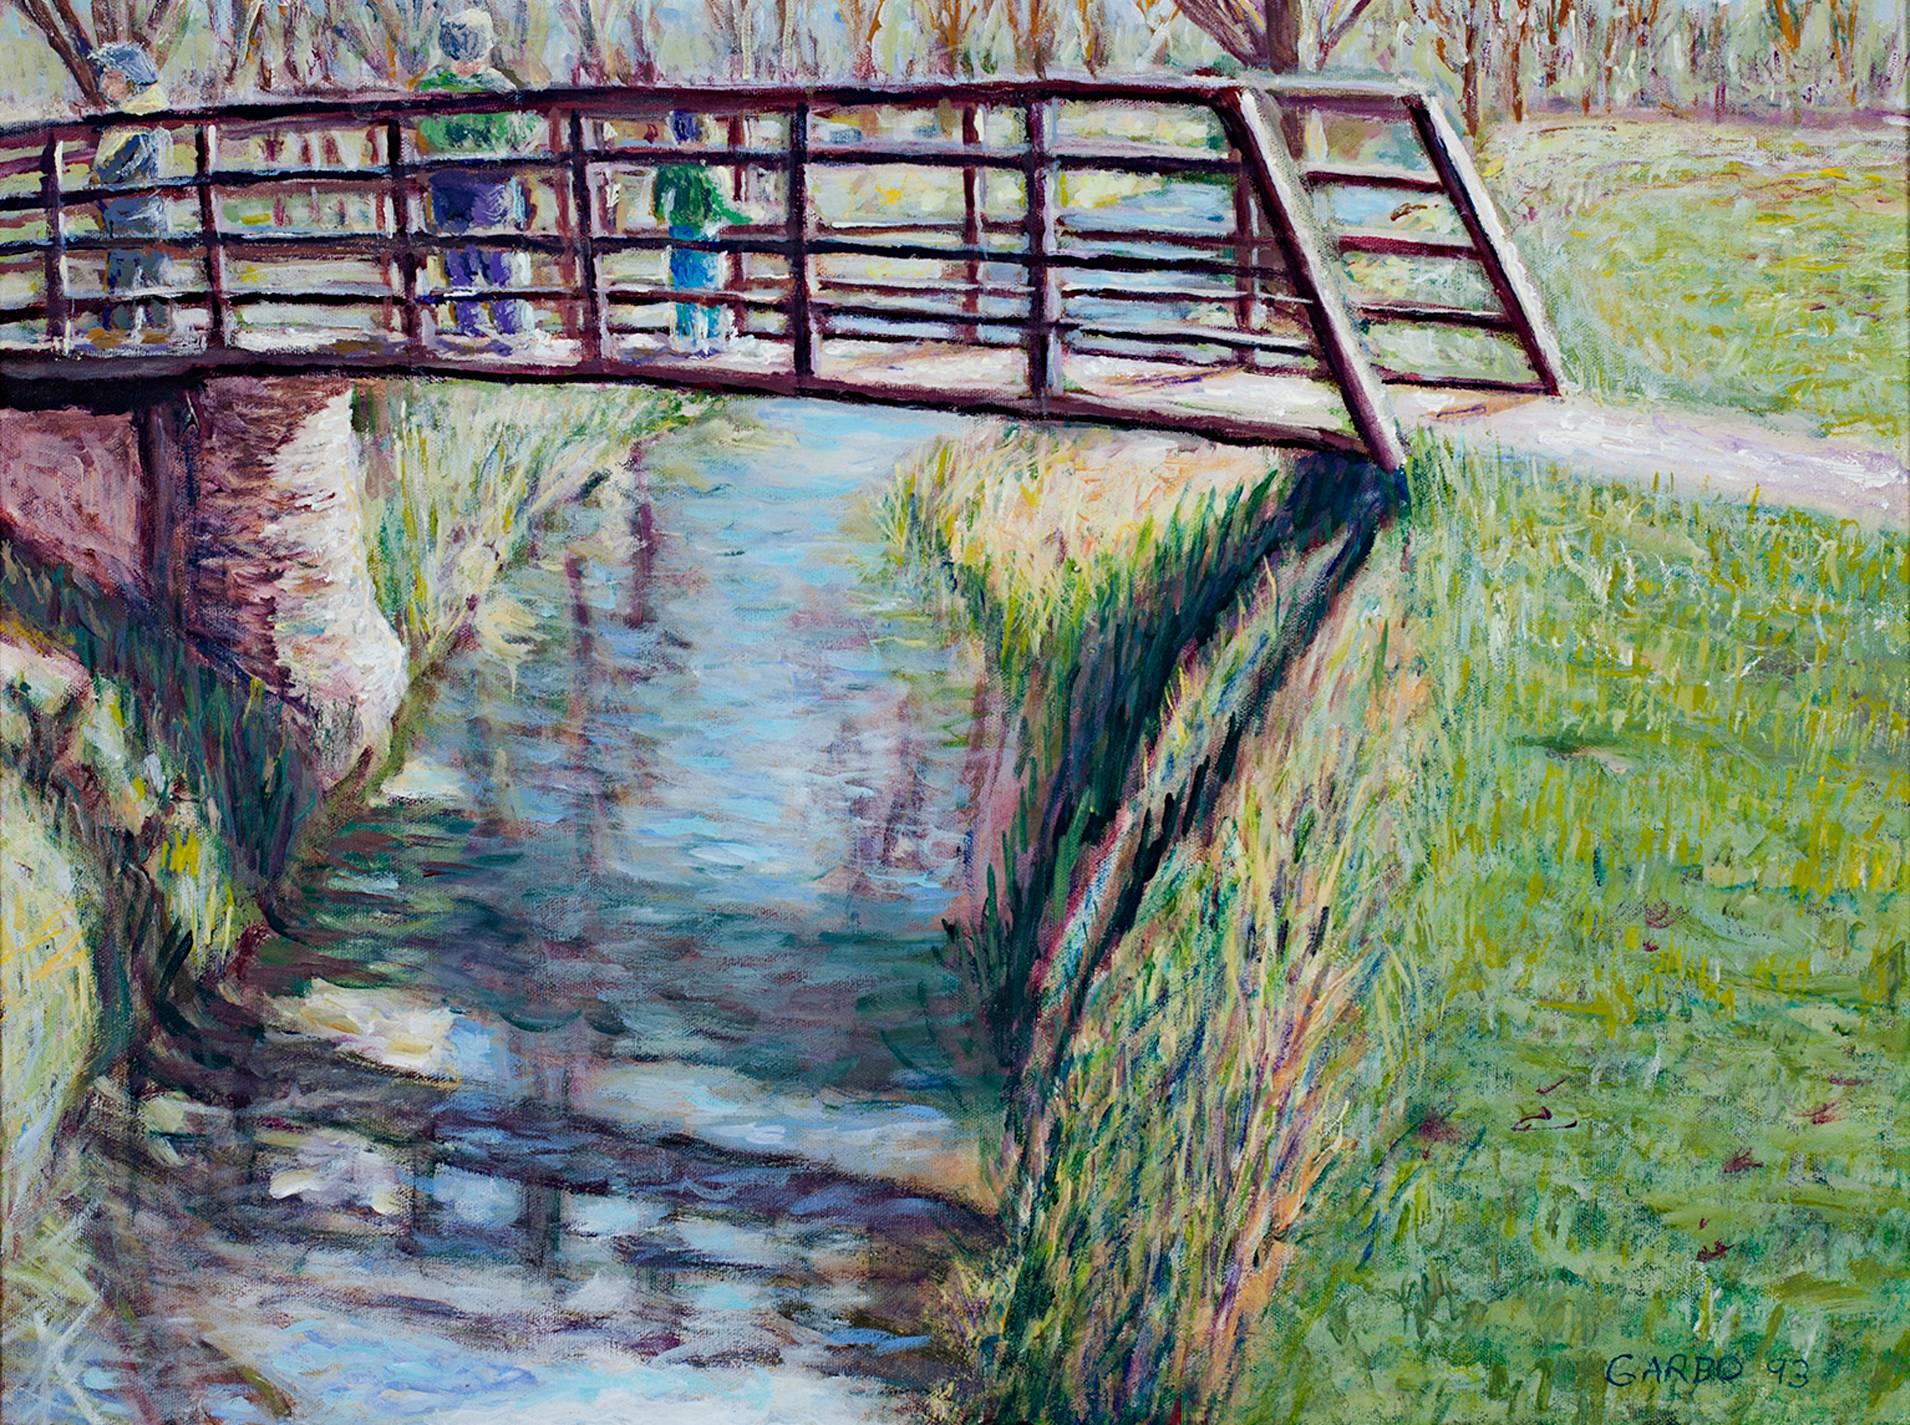 "Wirth Park Bridge in Spring" is an original acrylic painting on canvas by Chuck "Garbo" Hajinian. This piece depicts three children on a bridge over a stream. The artist signed the piece in the lower right. 

18" x 24" art
23 1/4" x 29 3/8"